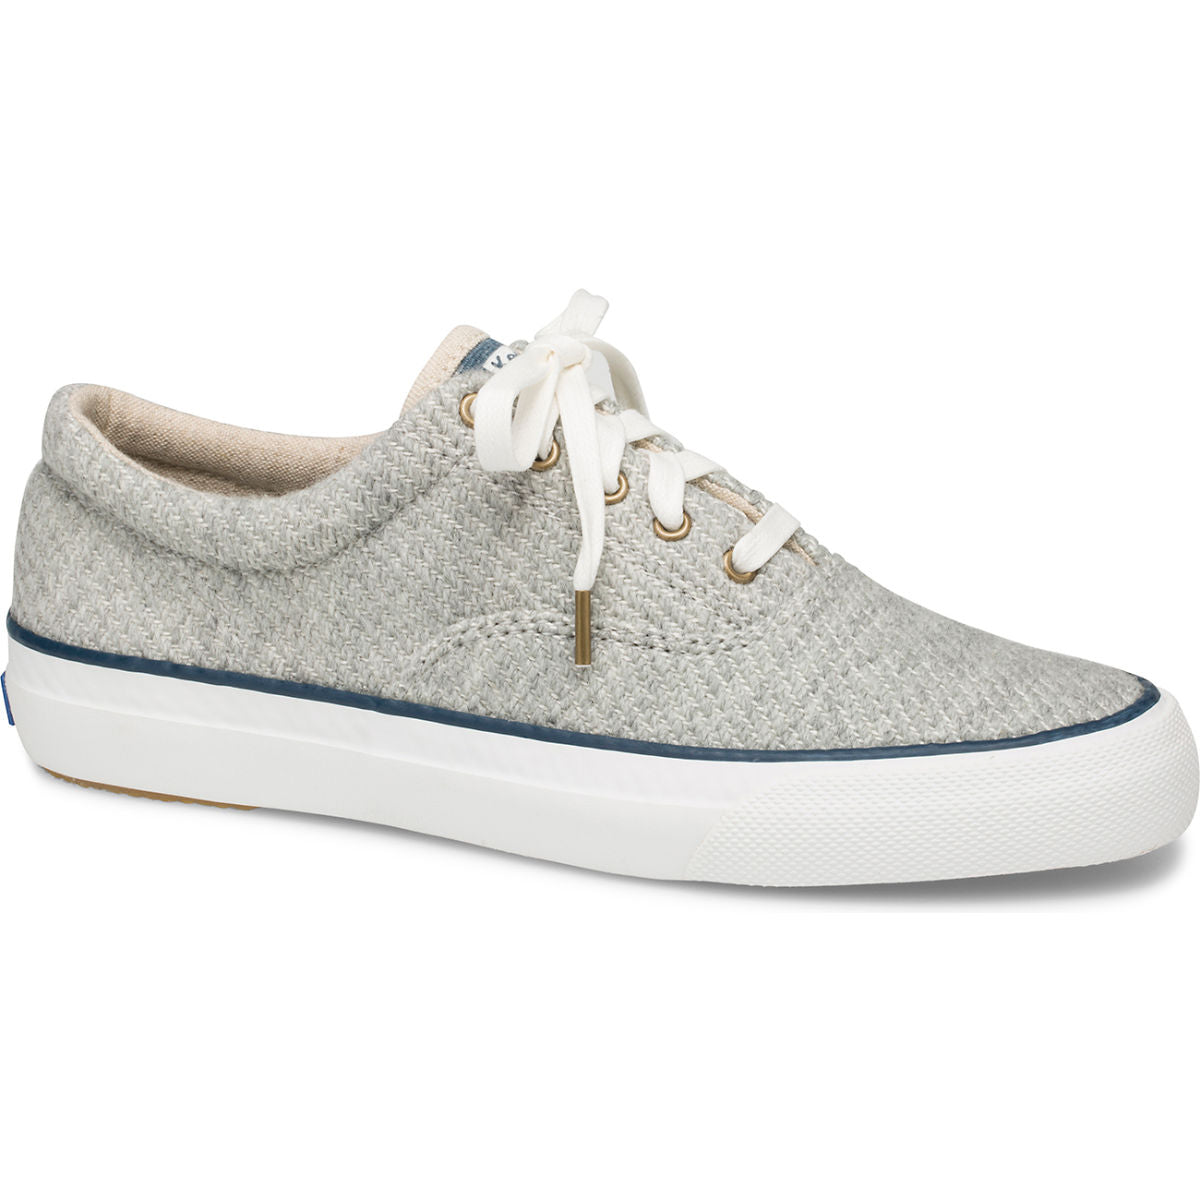 Keds Womens Anchor Swans Island Shoes